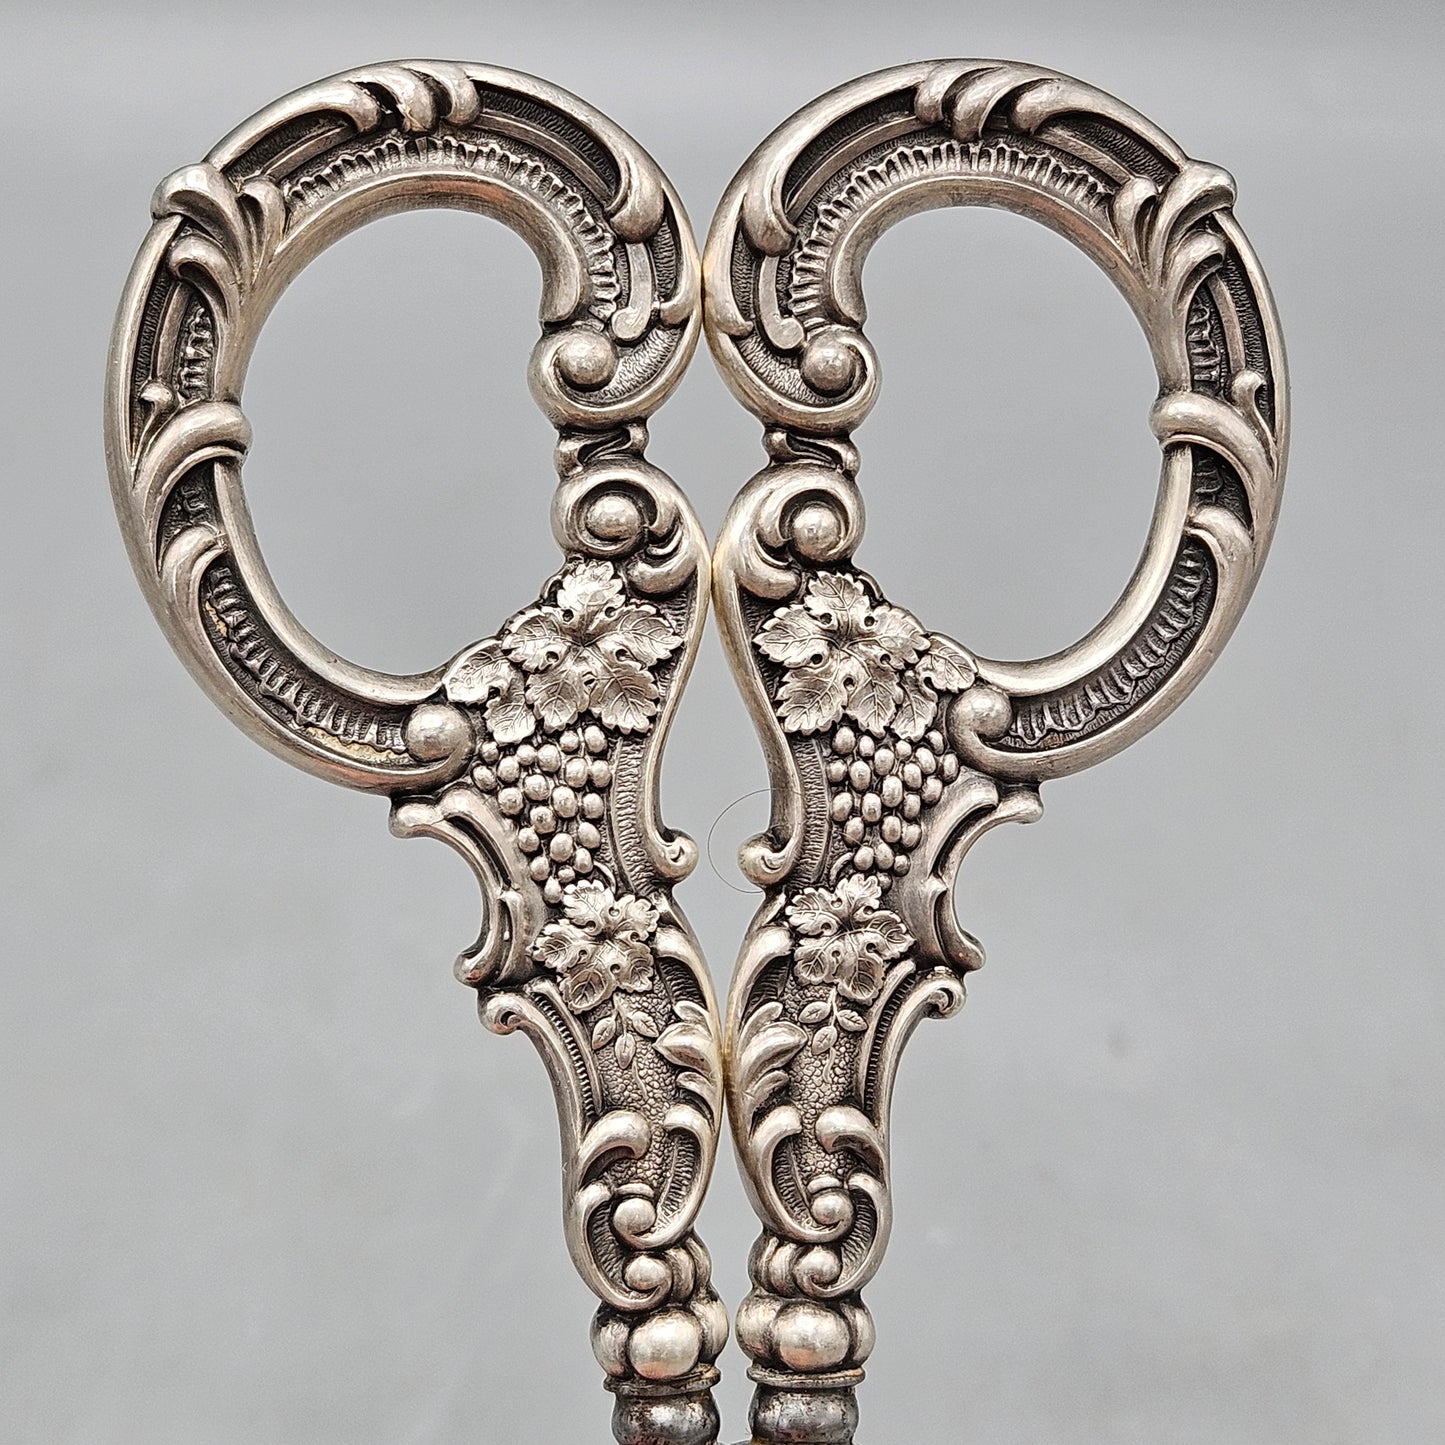 Antique Sterling Silver Scissors with Ornate Grape Handles